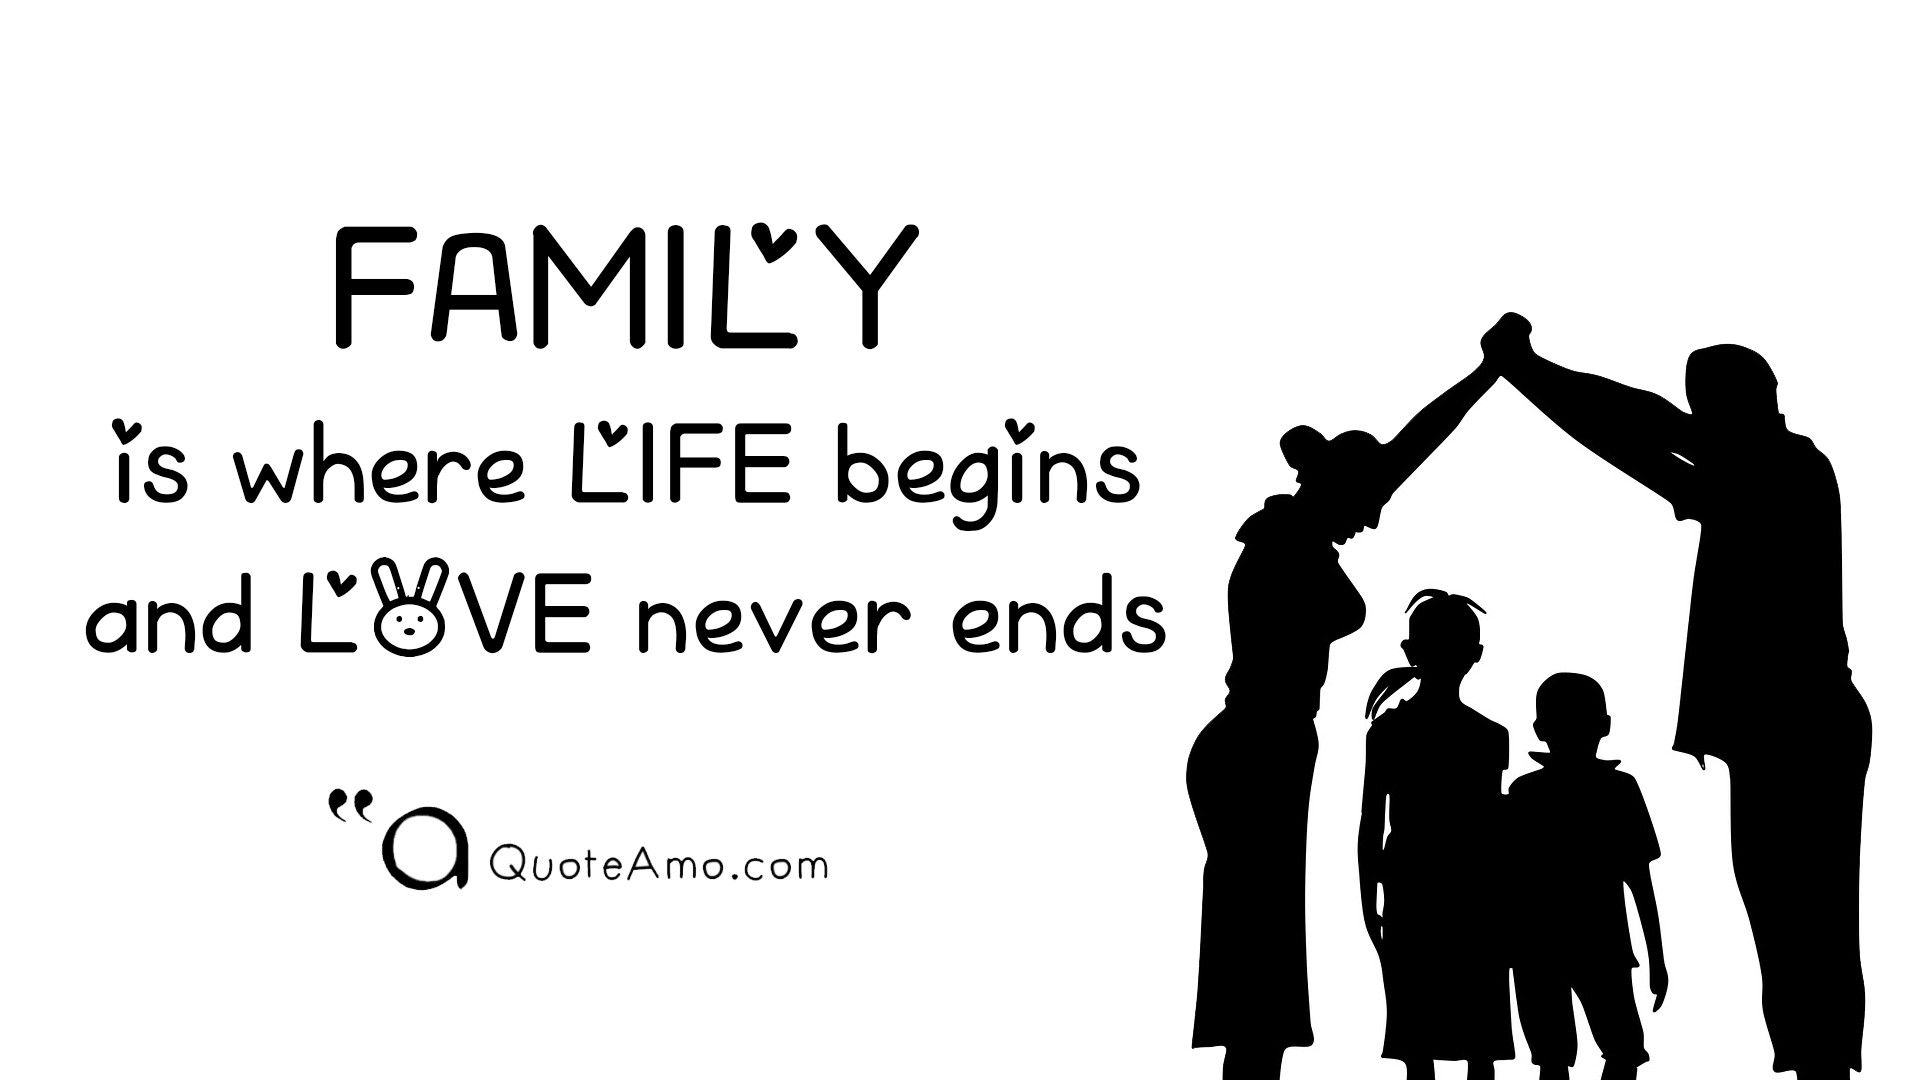 Family Wallpapers With Quotes
 Quotes about FAMILY Background Quotes HD Screen 1920